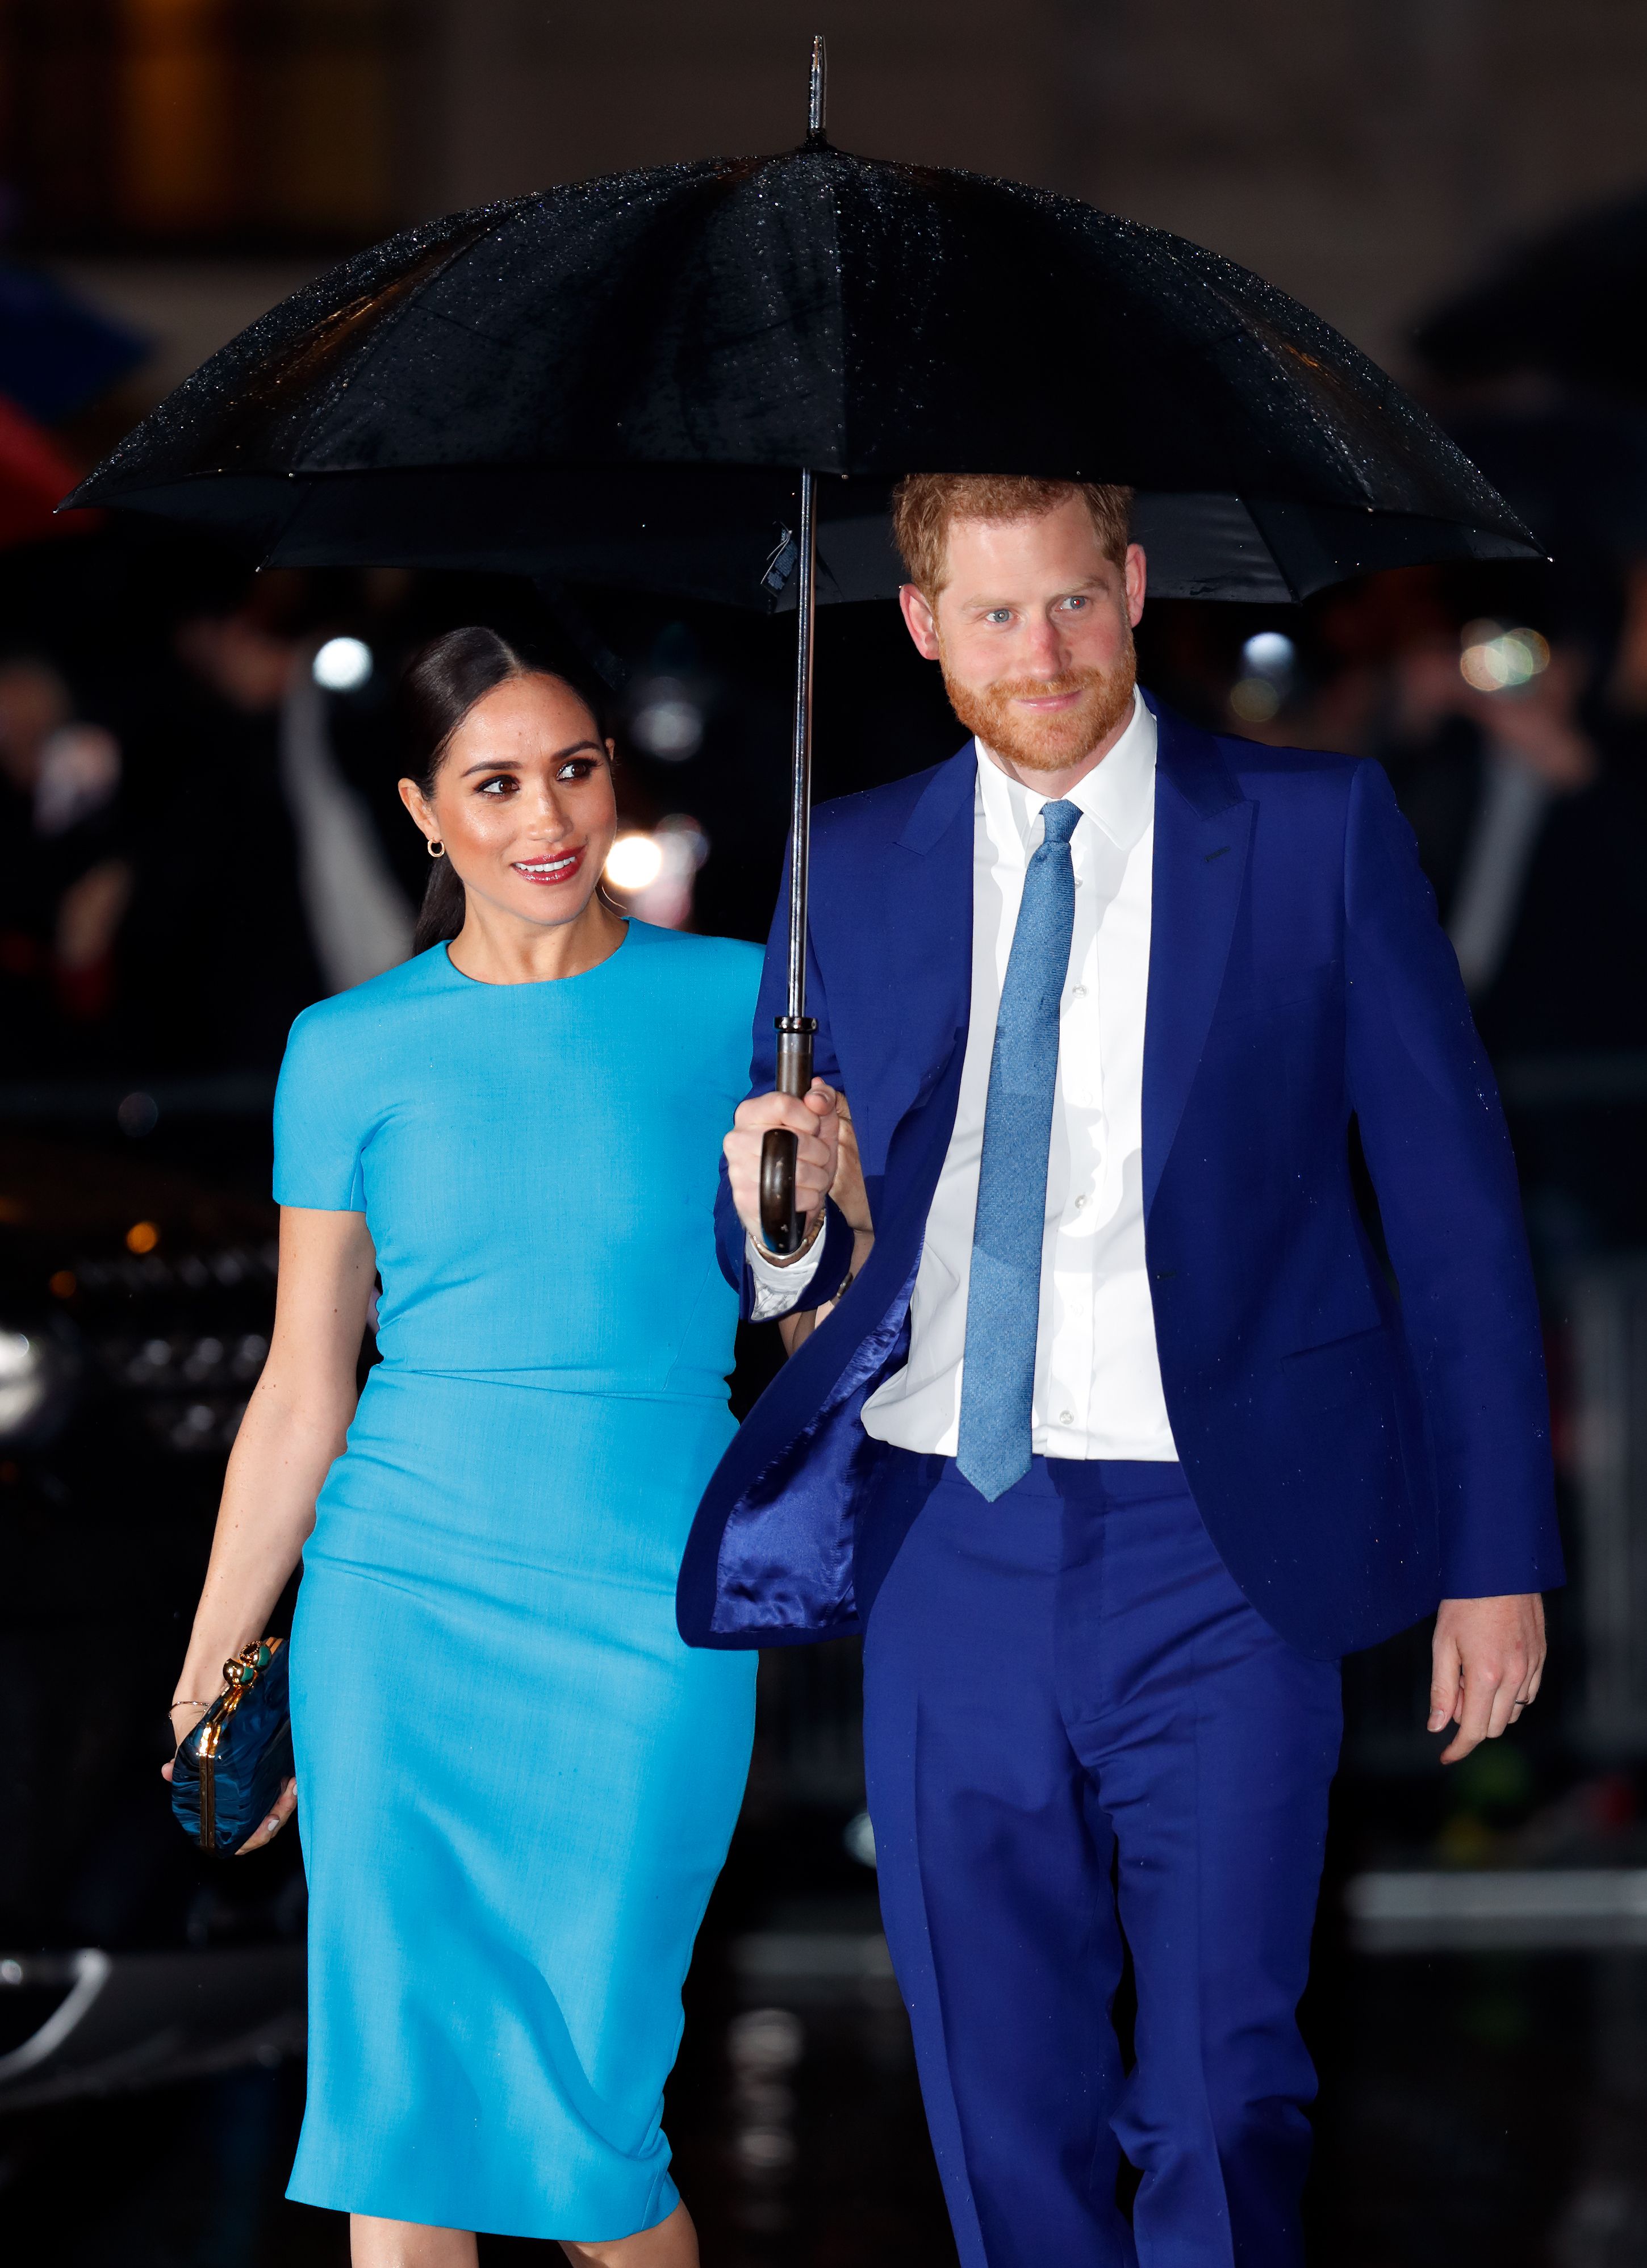 Meghan Markle and Prince Harry on March 5, 2020, in London, England | Photo: Getty Images